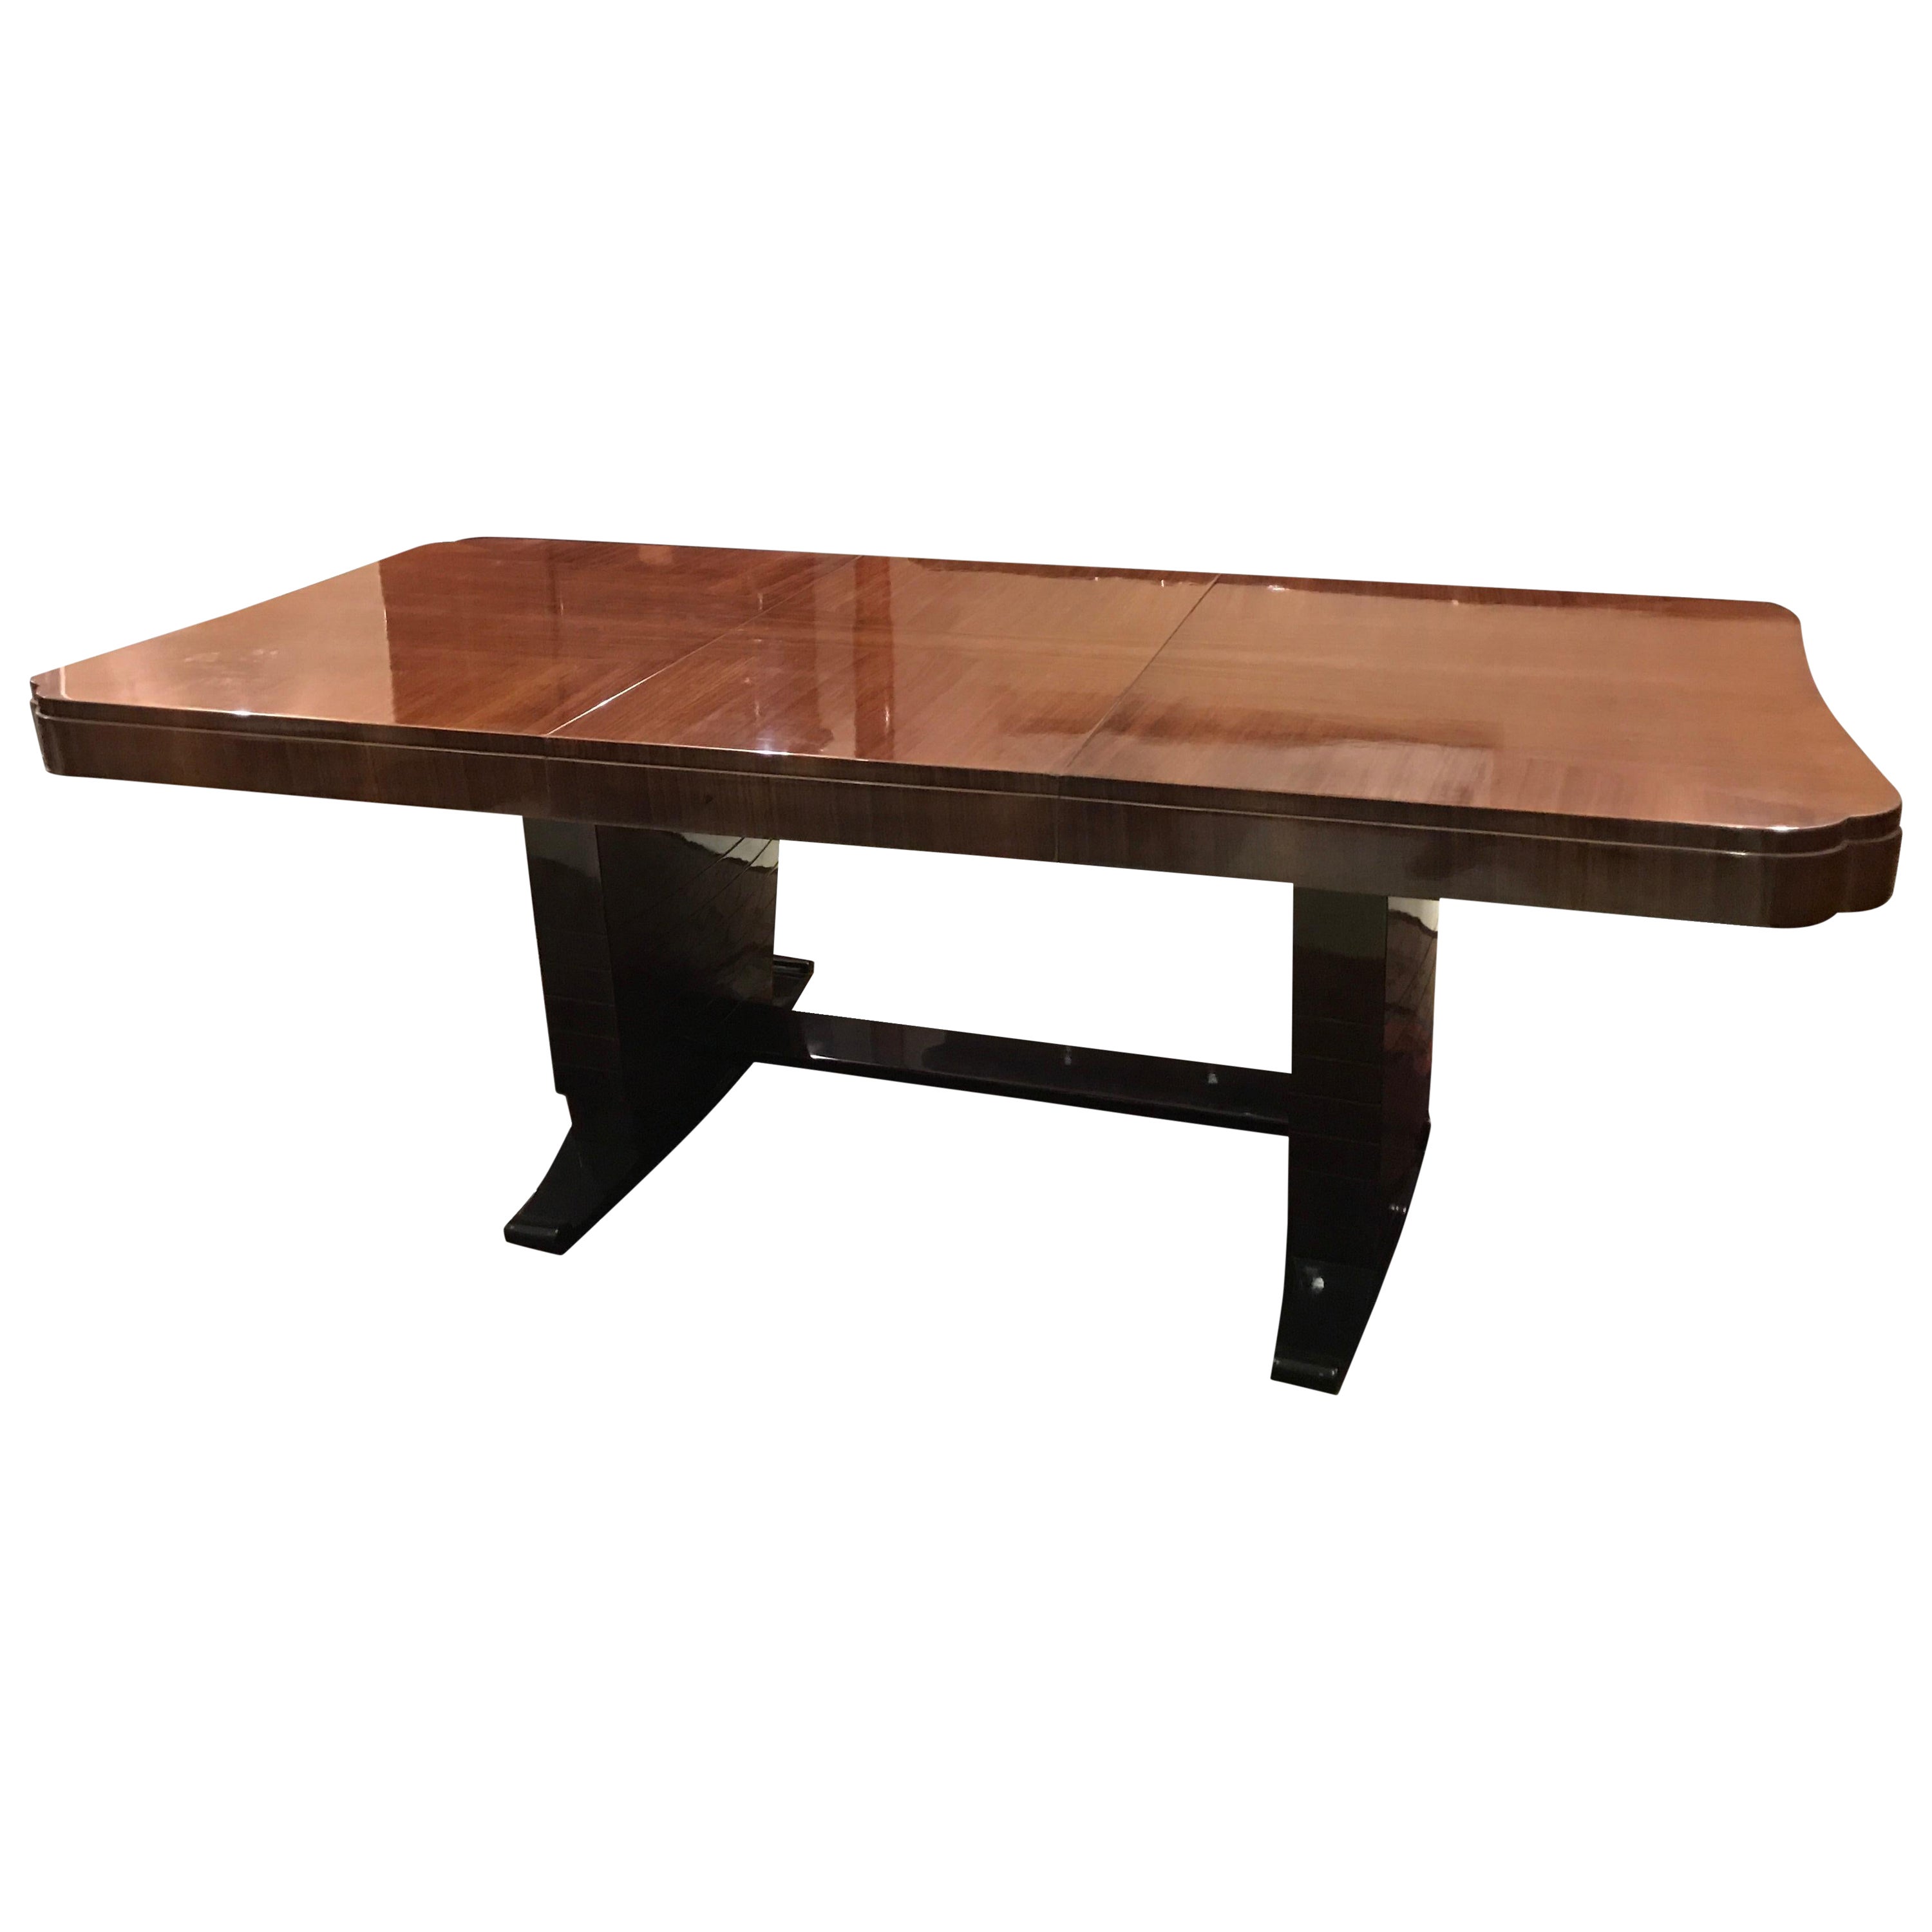 Art Deco Dining Table "8 People", 1920, Material: wood ,  French